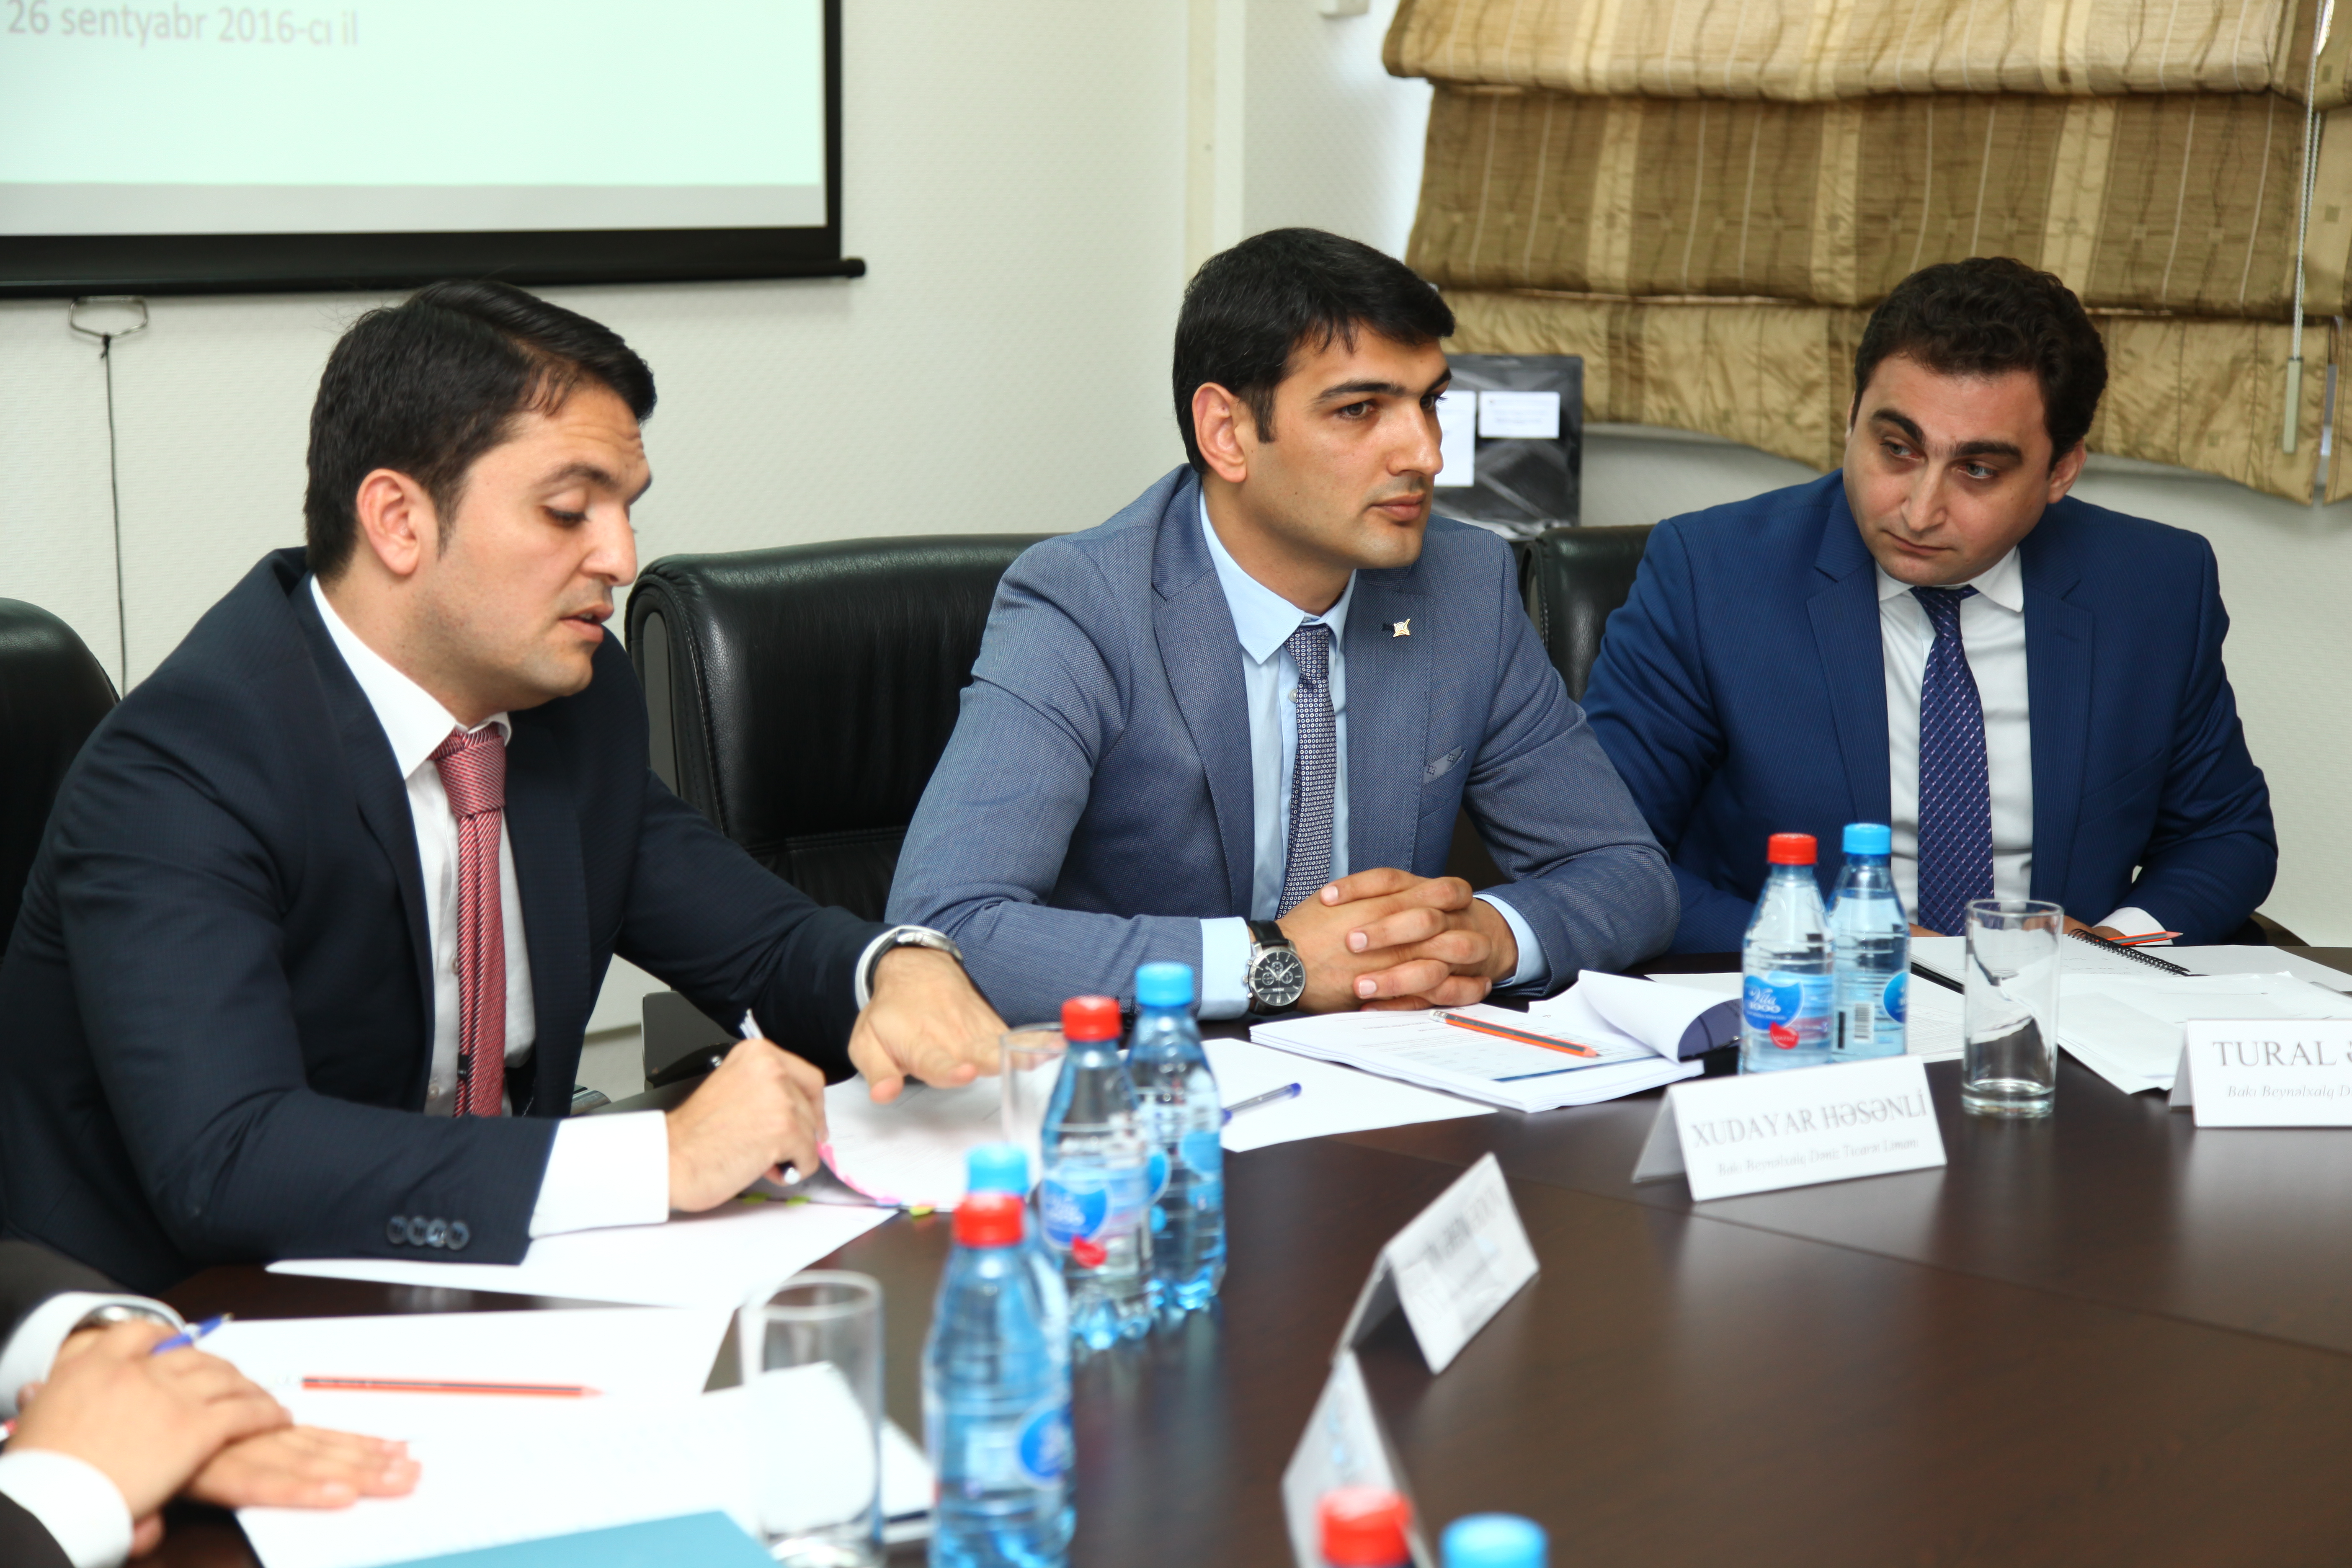 Heavy industry and machinery, utilities, logistics and trade sectors were discussed at the Center for Analysis of Economic Reforms and Communication